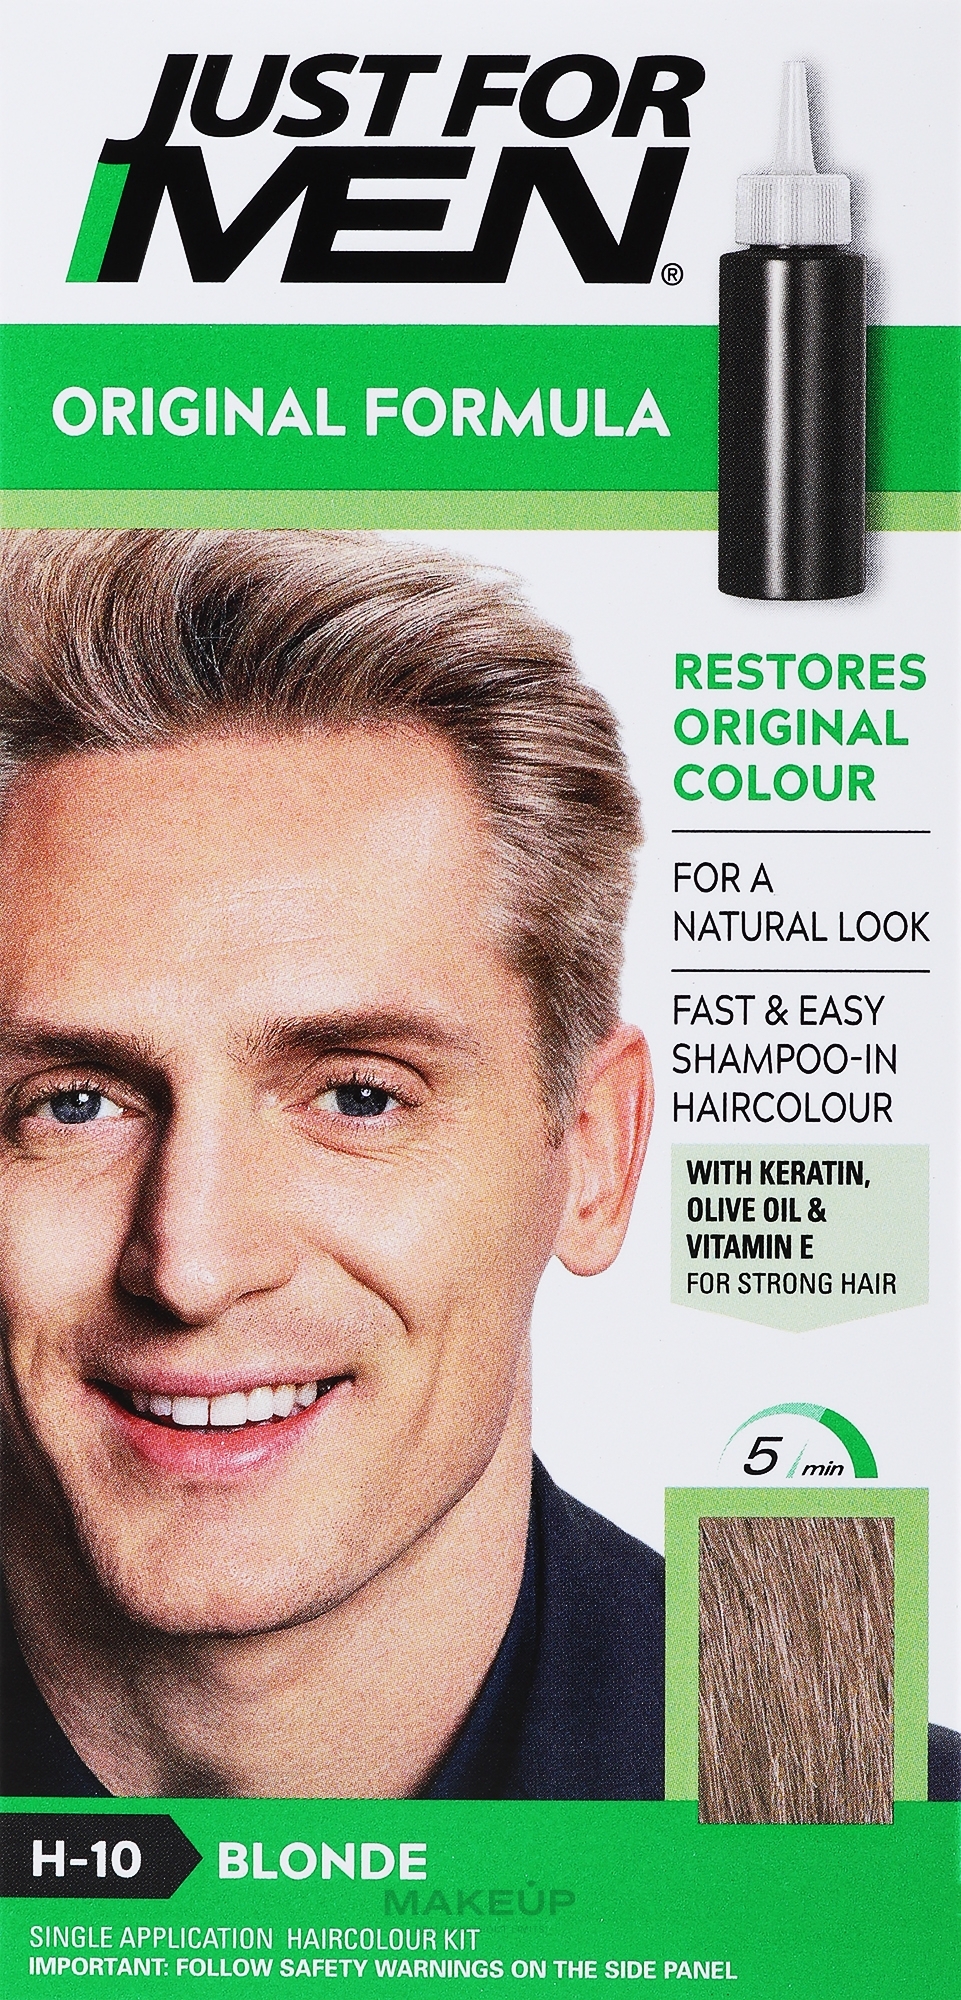 Hair Color - Just For Men Shampoo-in Color — photo H-10 - Blonde